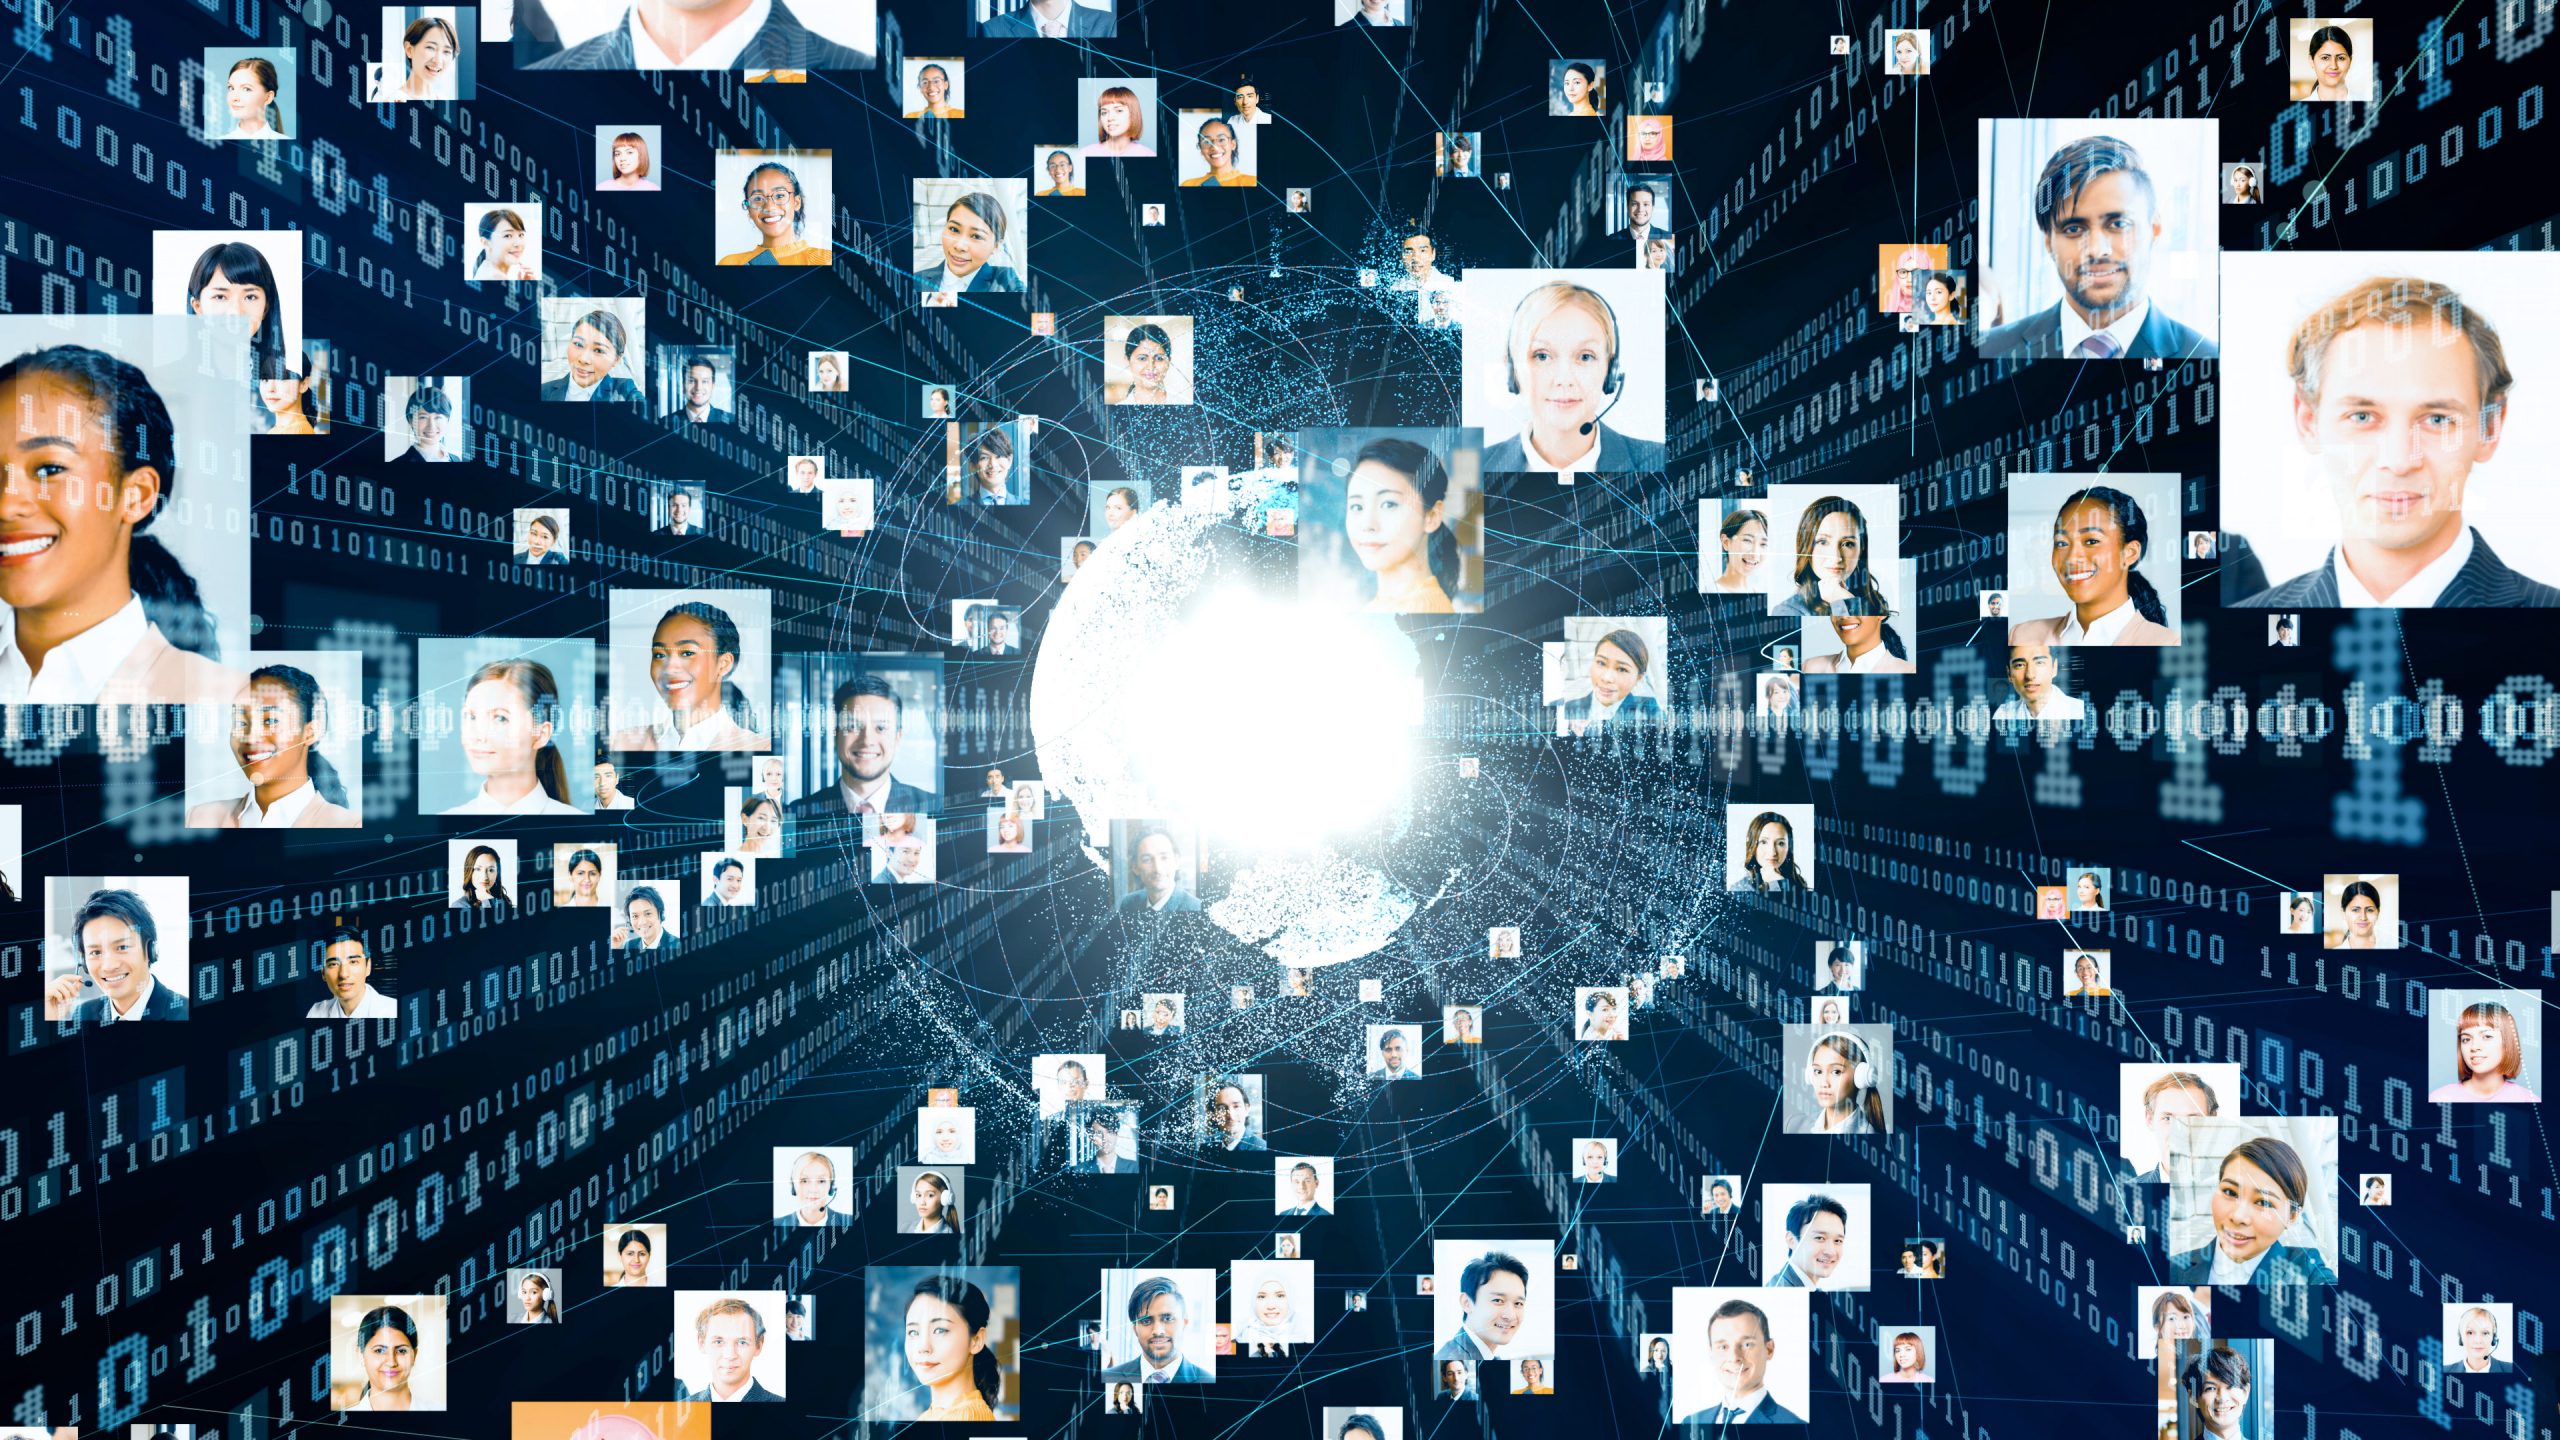 Many pictures of faces connected together in a digital network.